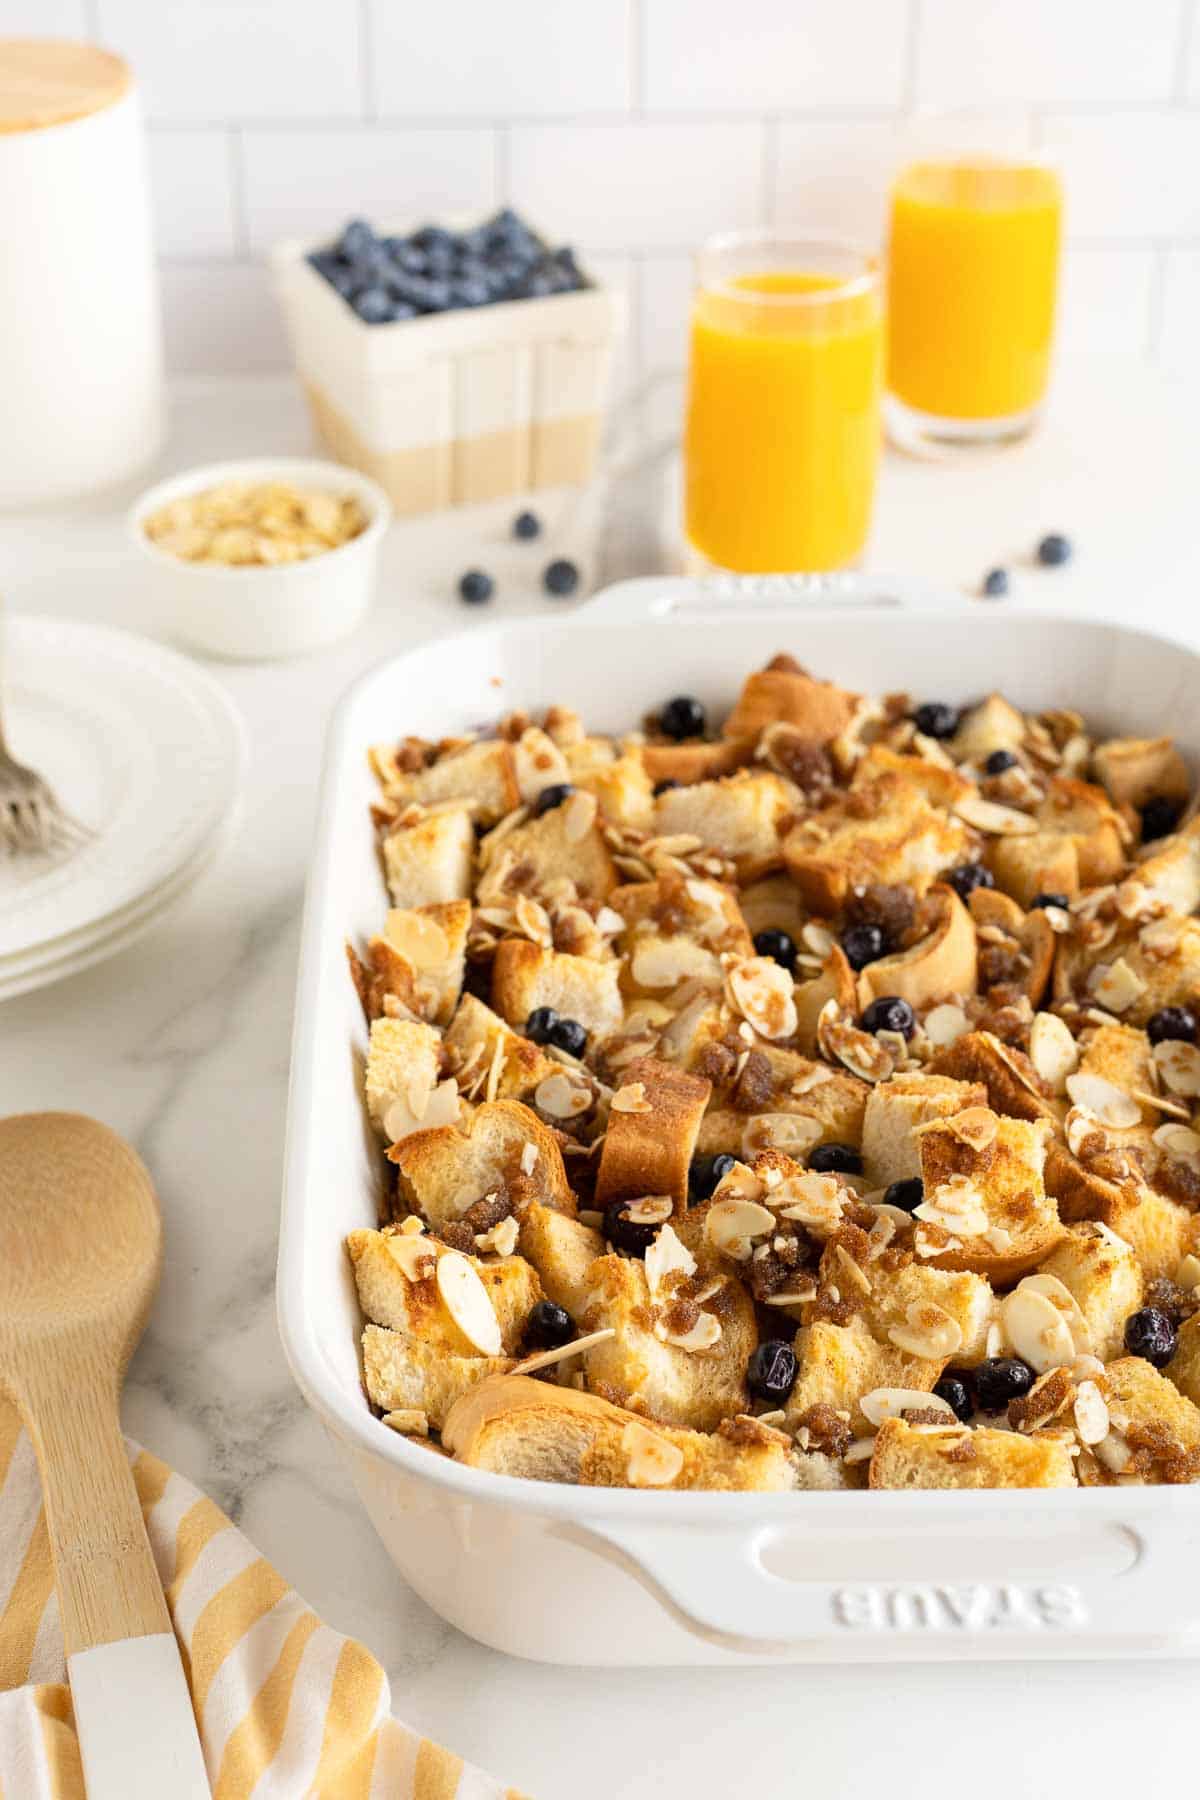 Blueberry French toast casserole in a white baking dish on a kitchen counter with glasses of orange juice.